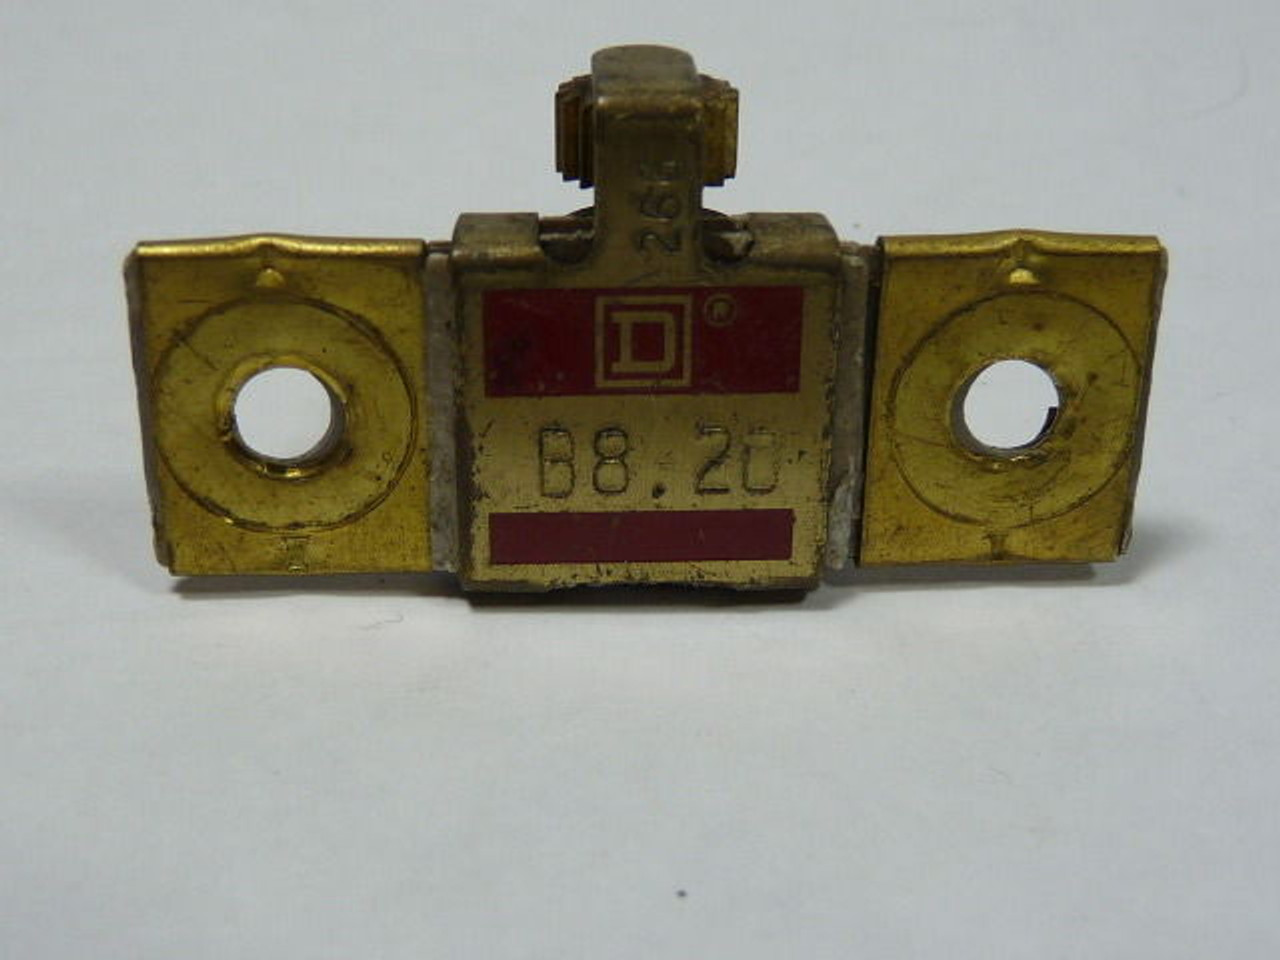 Square D B8.20 Overload Relay Thermal Unit USED